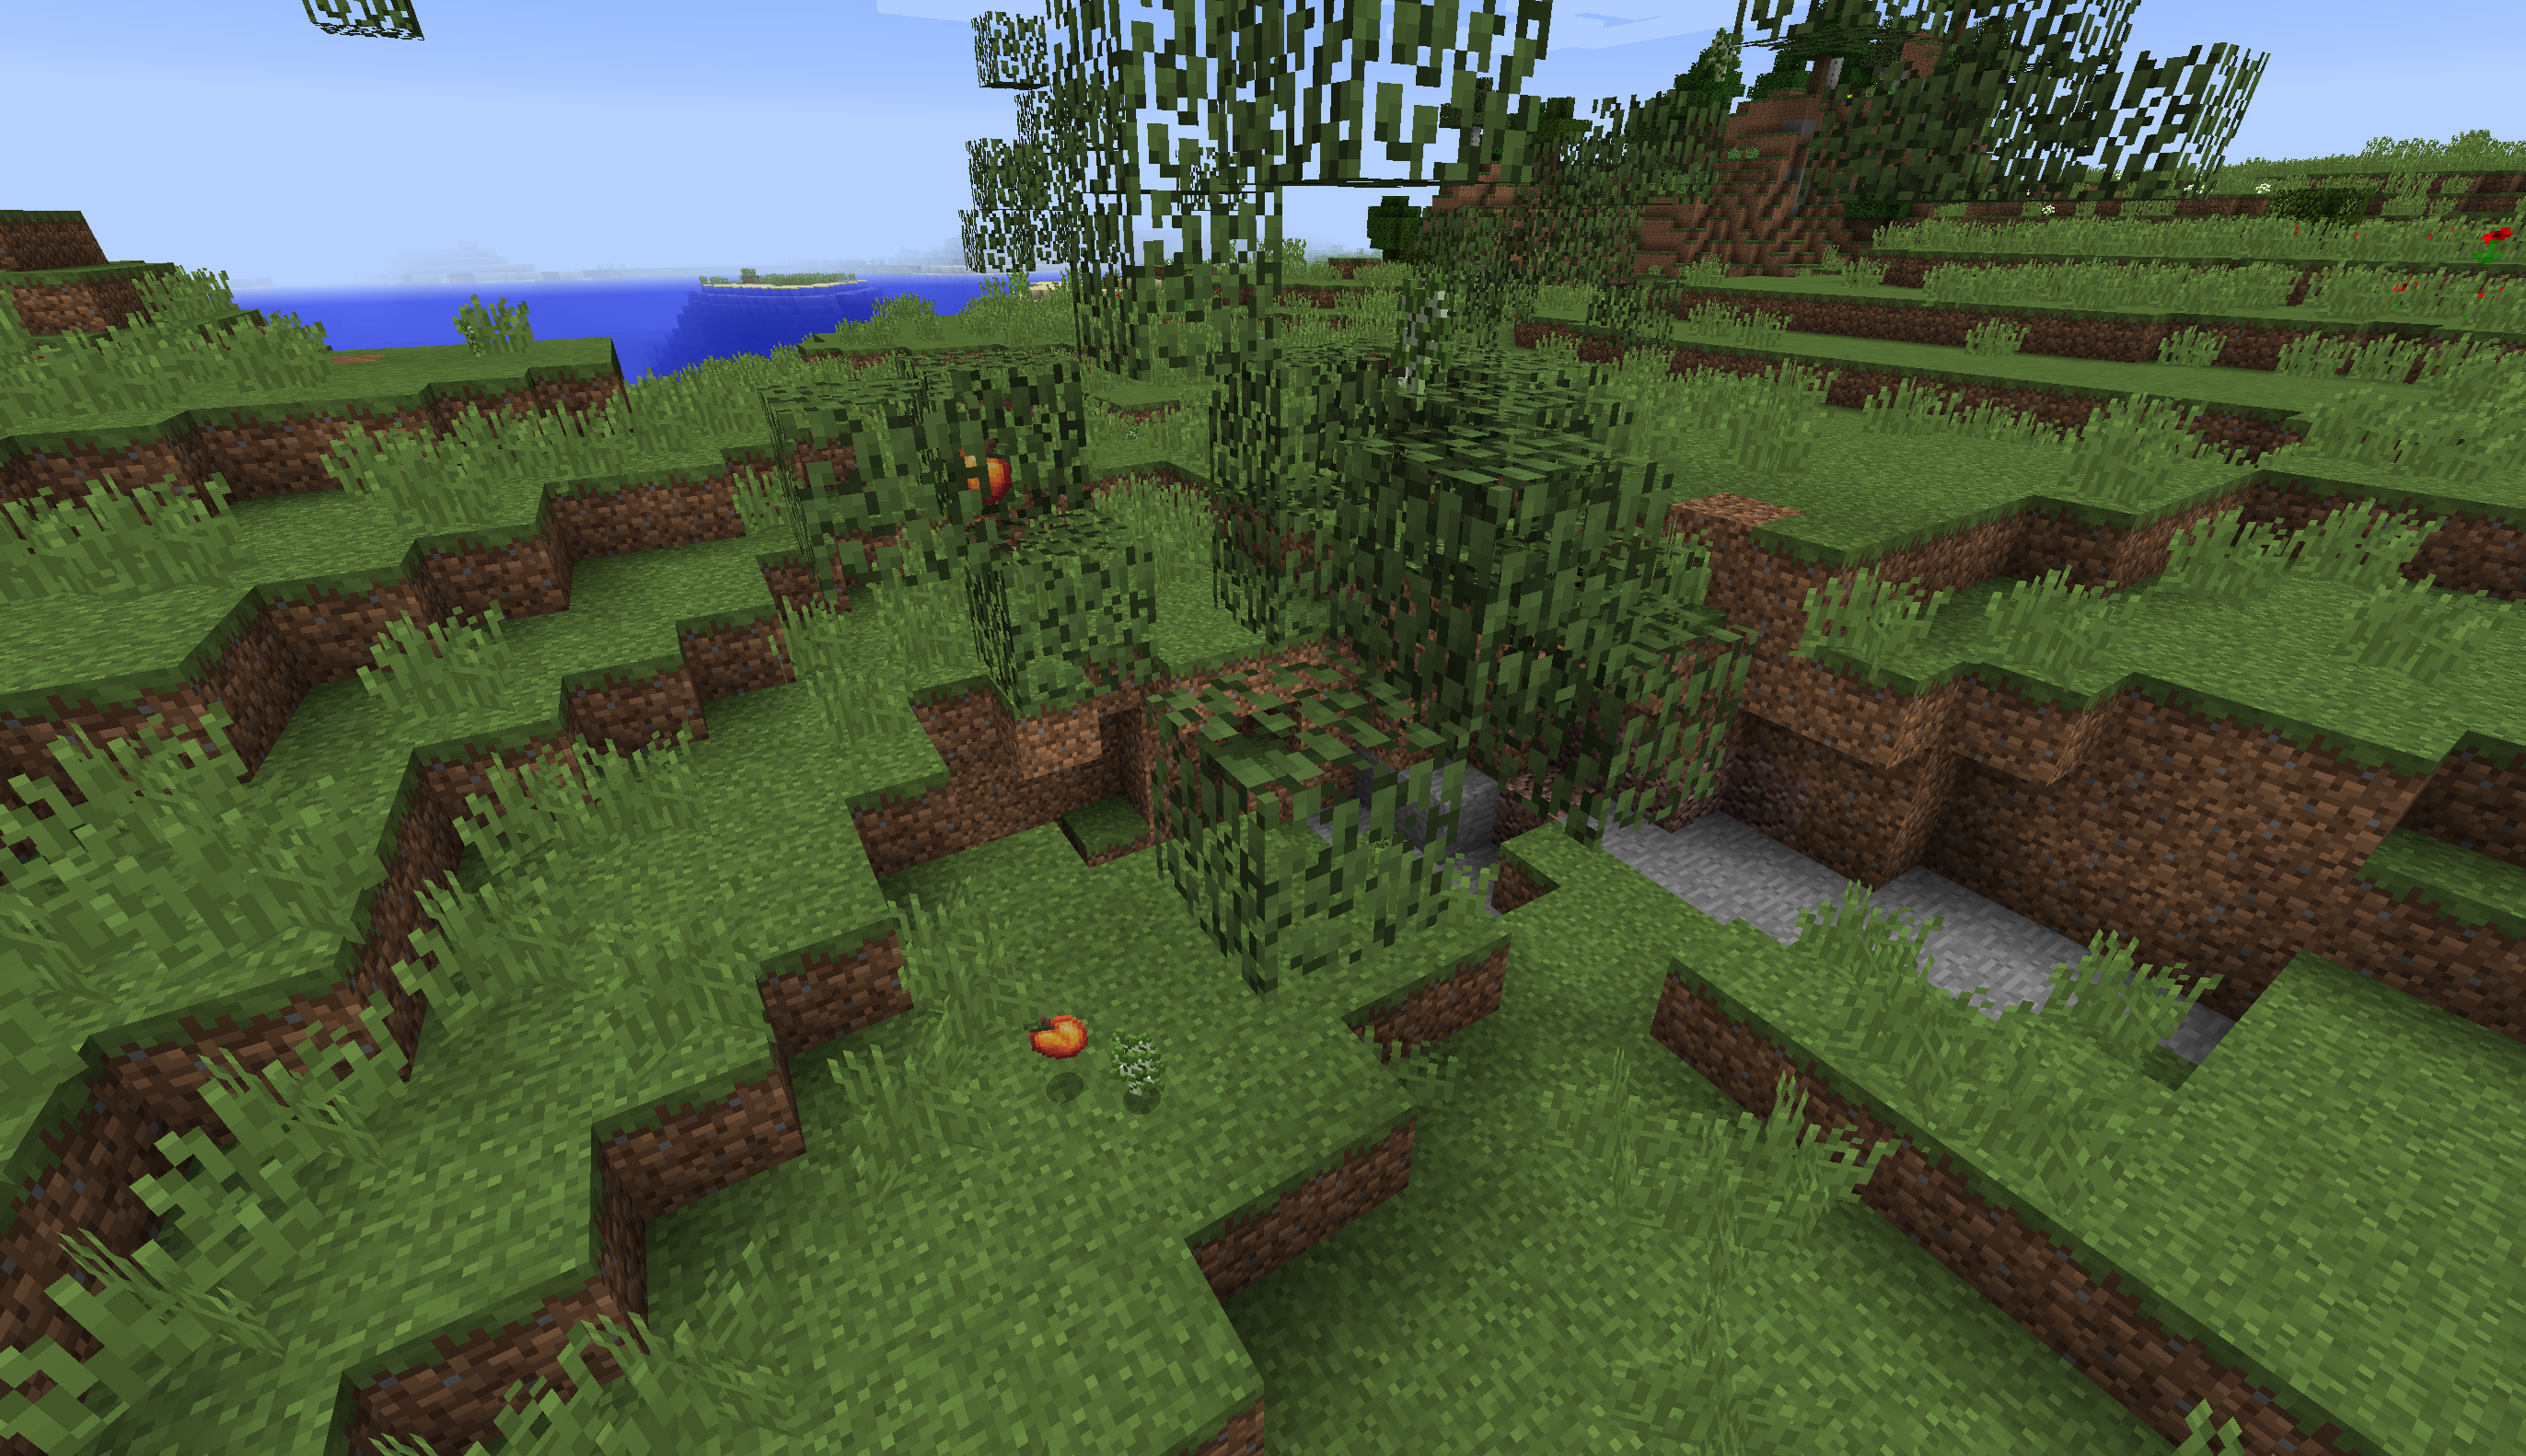 Images - Peachy - Mods - Projects - Minecraft CurseForge